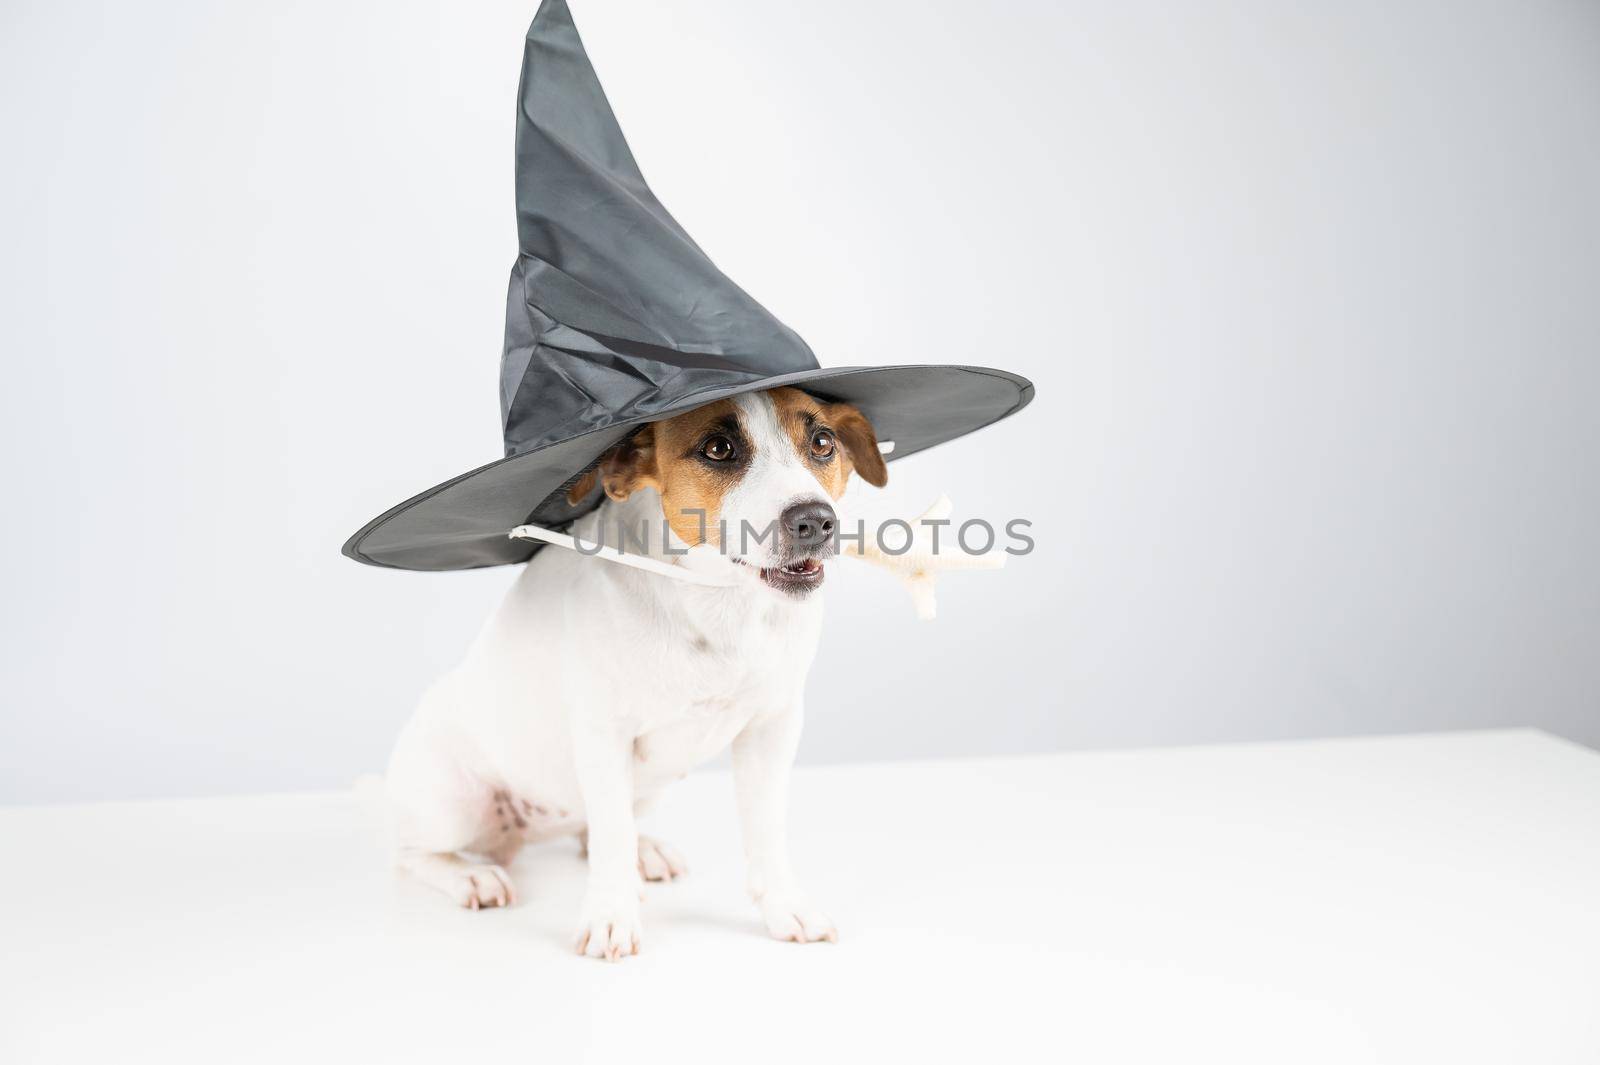 Jack russell terrier dog in witch hat holding chicken paw for casting spells on white background